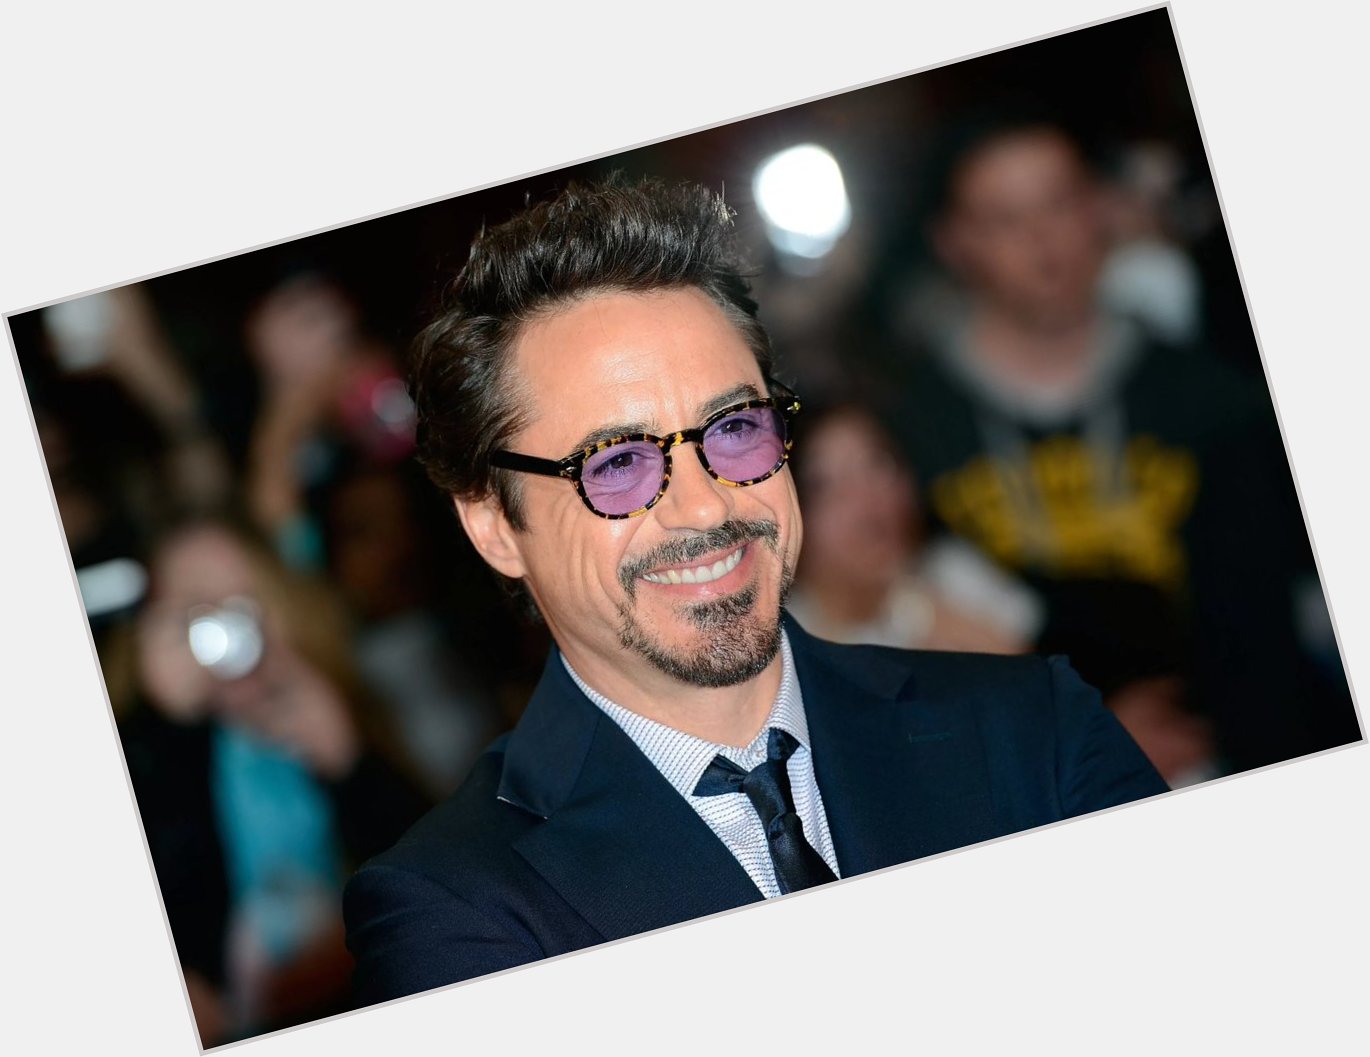 Happy birthday to the wonderful Robert Downey Jr, the actor who played iconic Iron Man at the MCU  